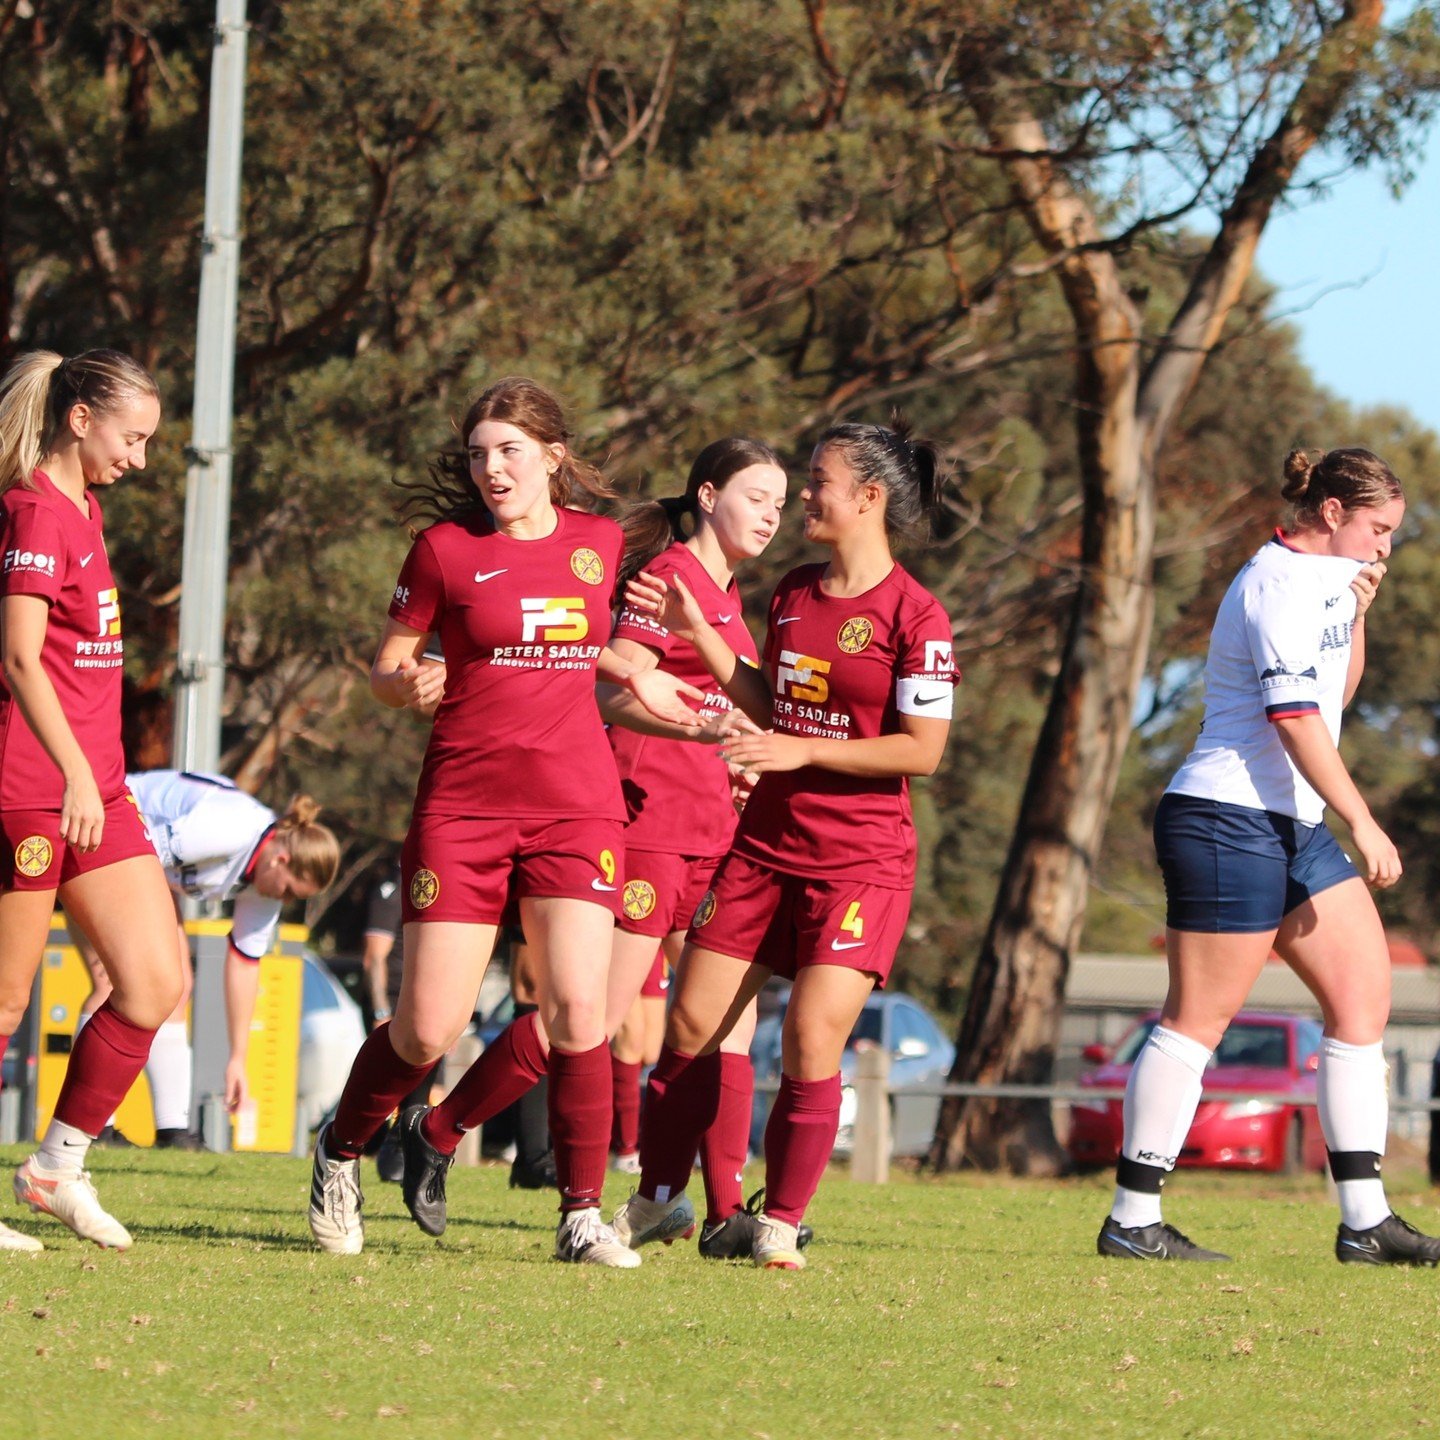 Our Senior Women had a fantastic start to their season, walking away with a huge 6-1 win on Sunday against Geelong Rangers SC. A great game to watch - well done &amp; keep it up! 🥳⚽️🥇